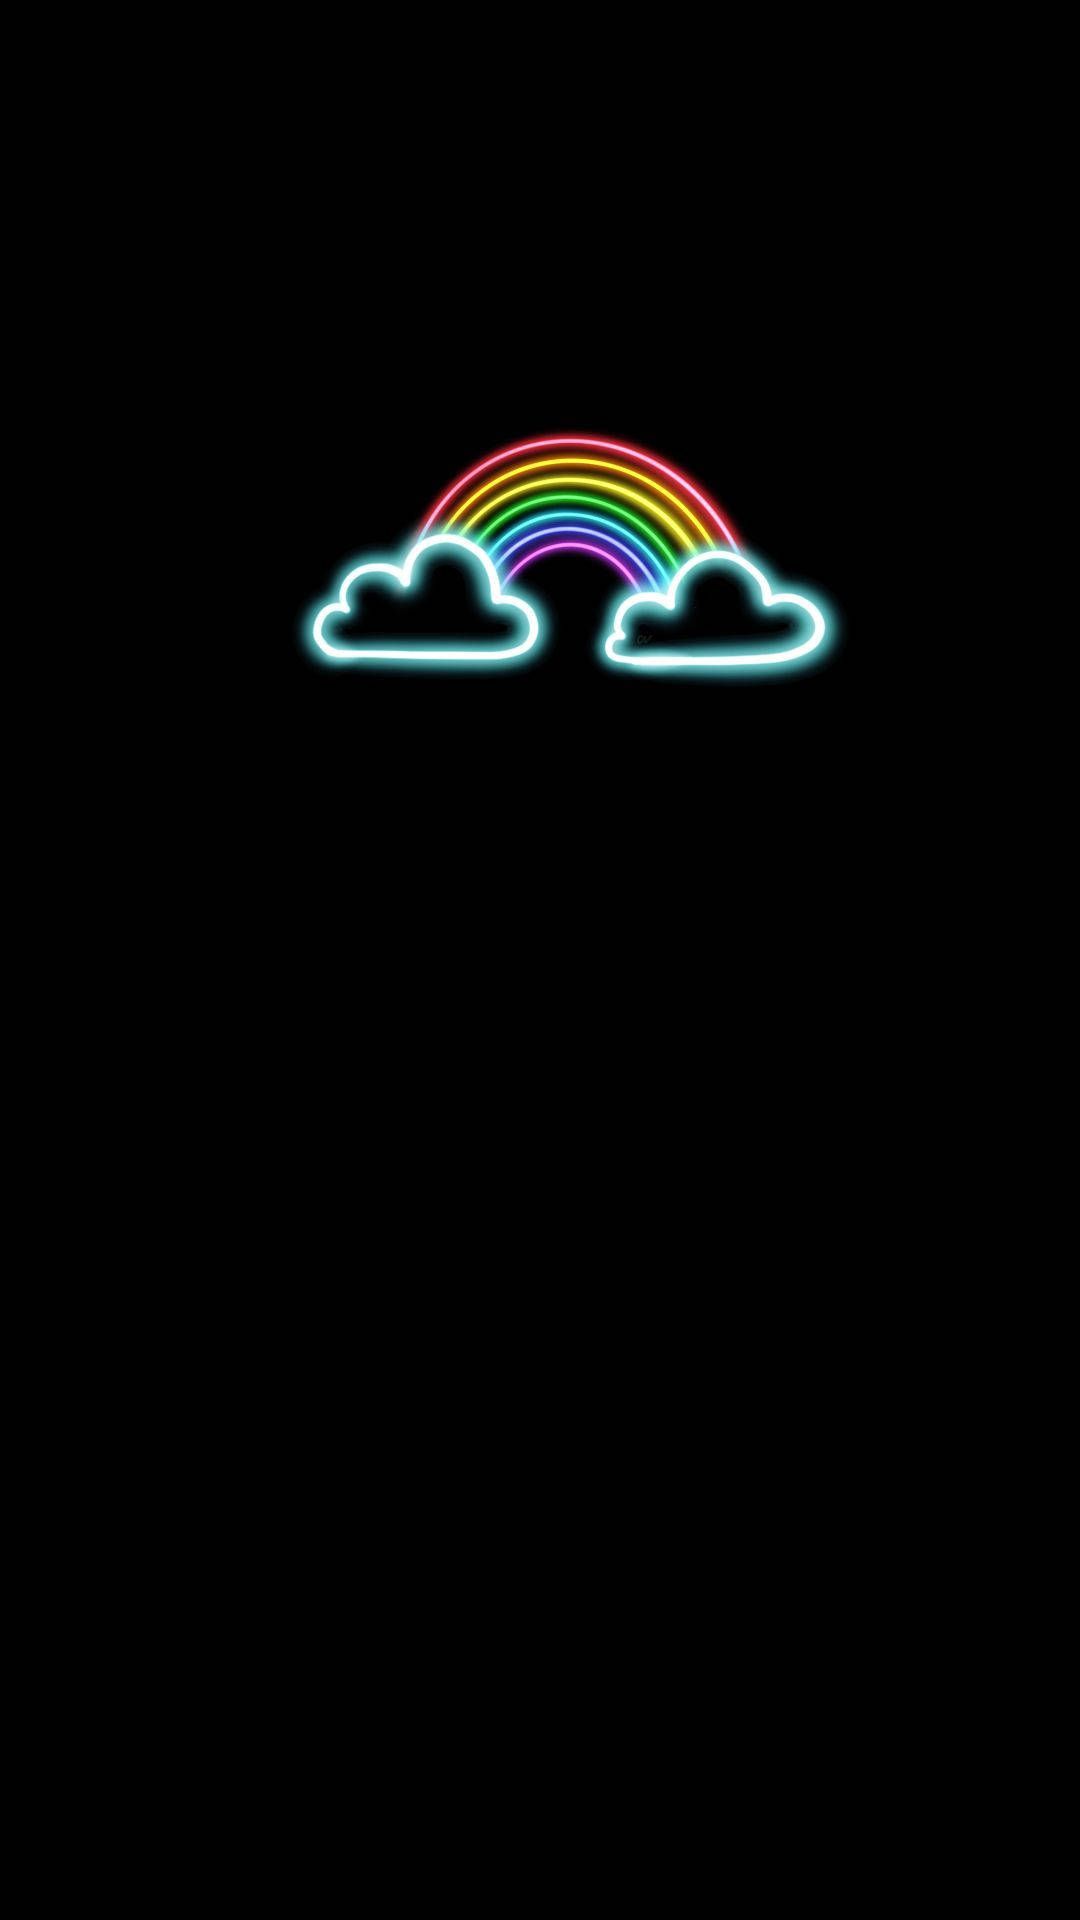 Aesthetic wallpaper neon rainbow in the clouds on a black background - Rainbows